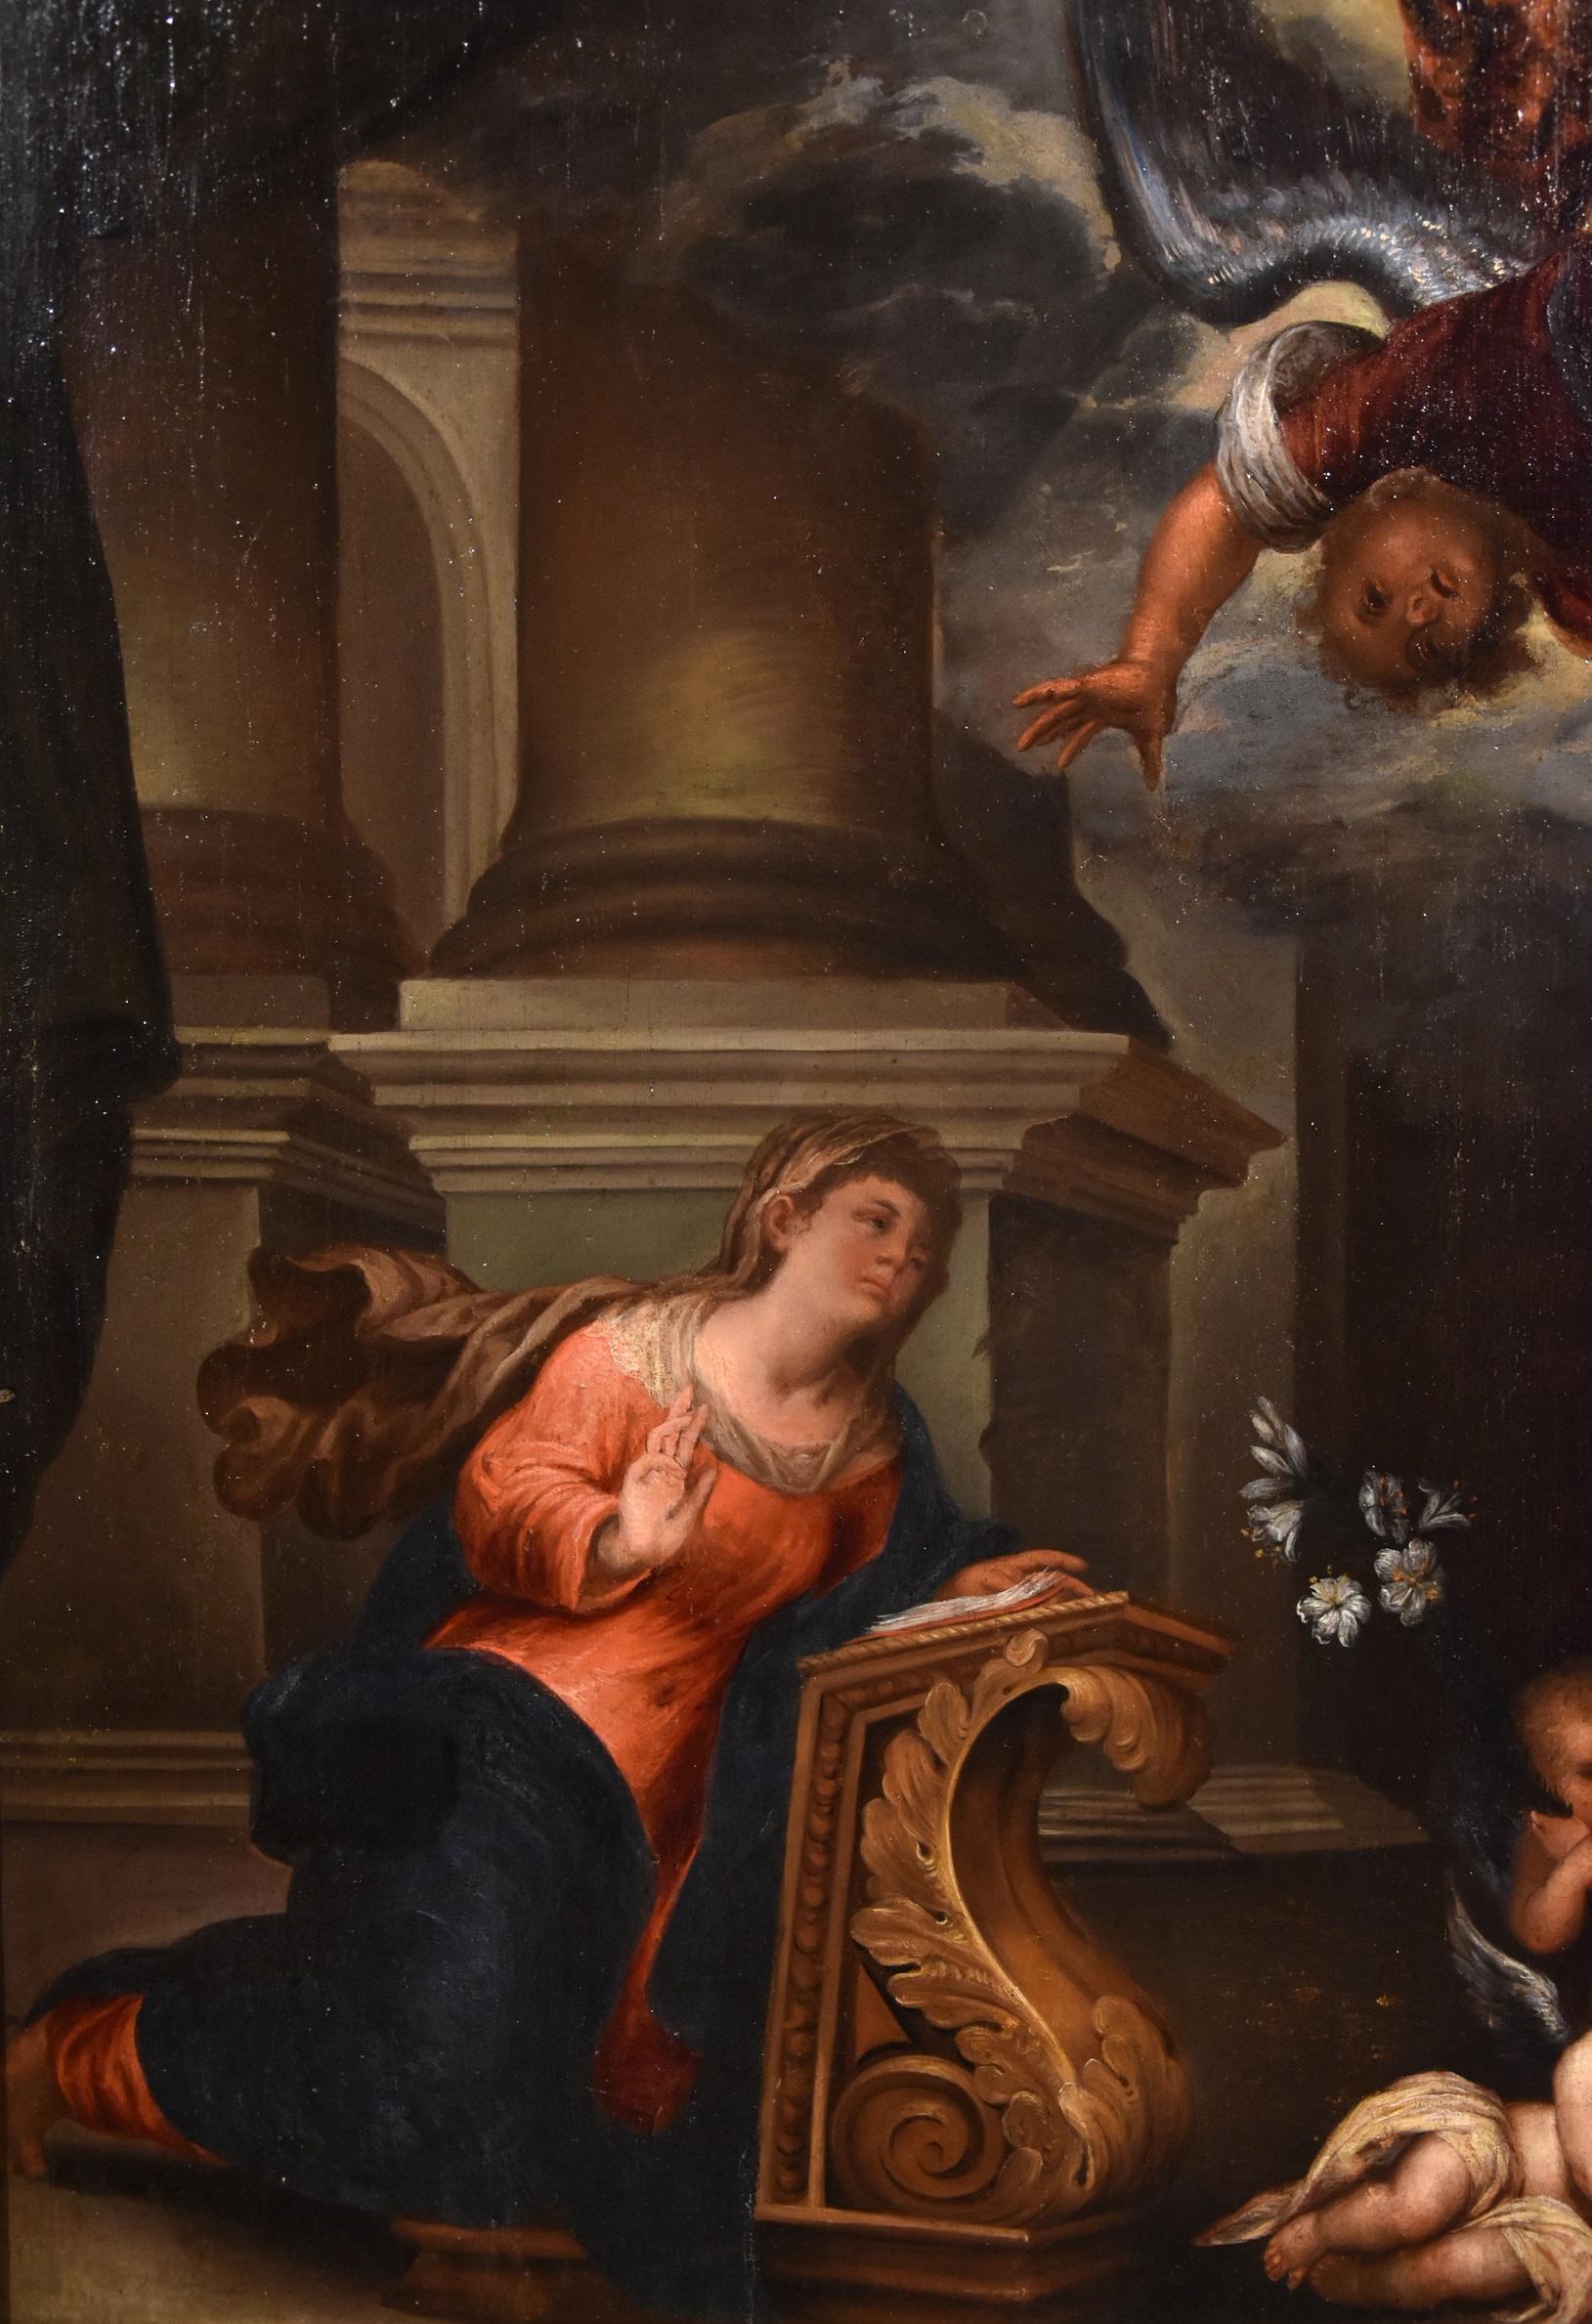 Giovanni Andrea Ansaldo (Genoa, Voltri 1584 - Genoa 1638)
The Annunciation
Oil on panel (100 x 82 cm, framed 111 x 93 cm)

The beautiful Annunciation that we show you is the work of Andrea Ansaldo, one of the most interesting painters of the early